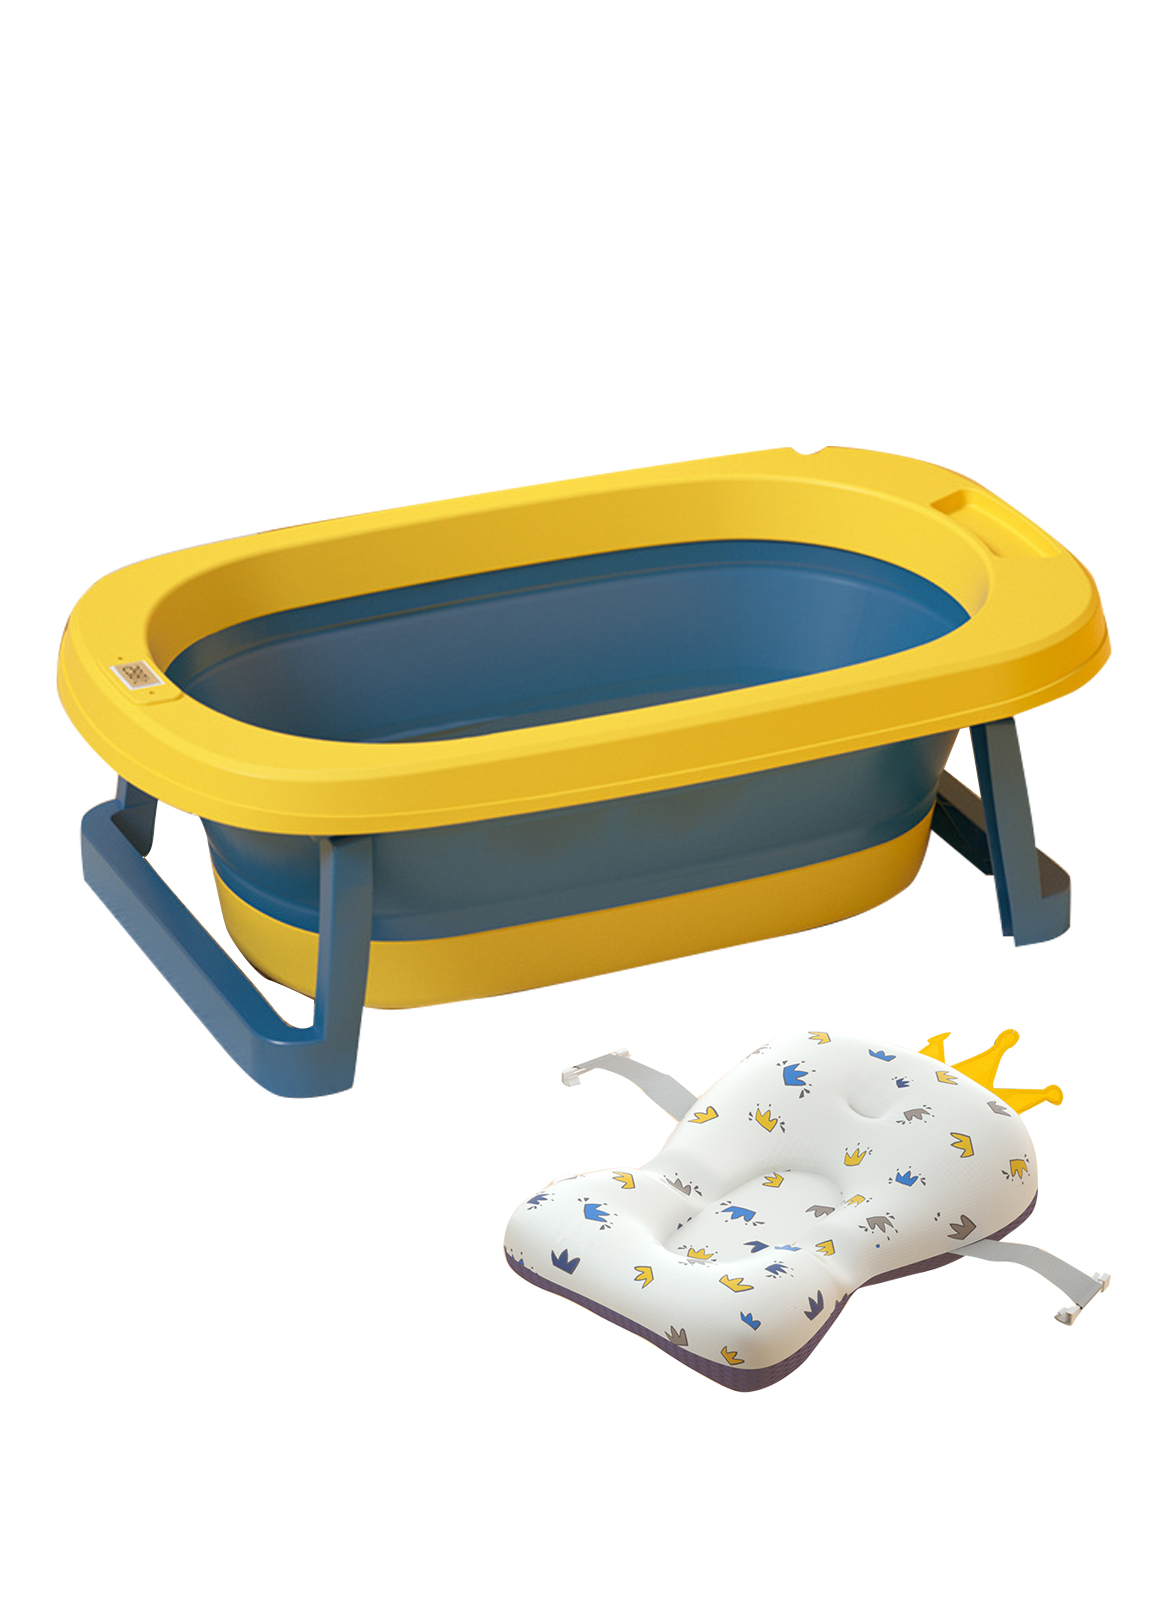 Children's Folding Bathtub with Cushion and Thermometer